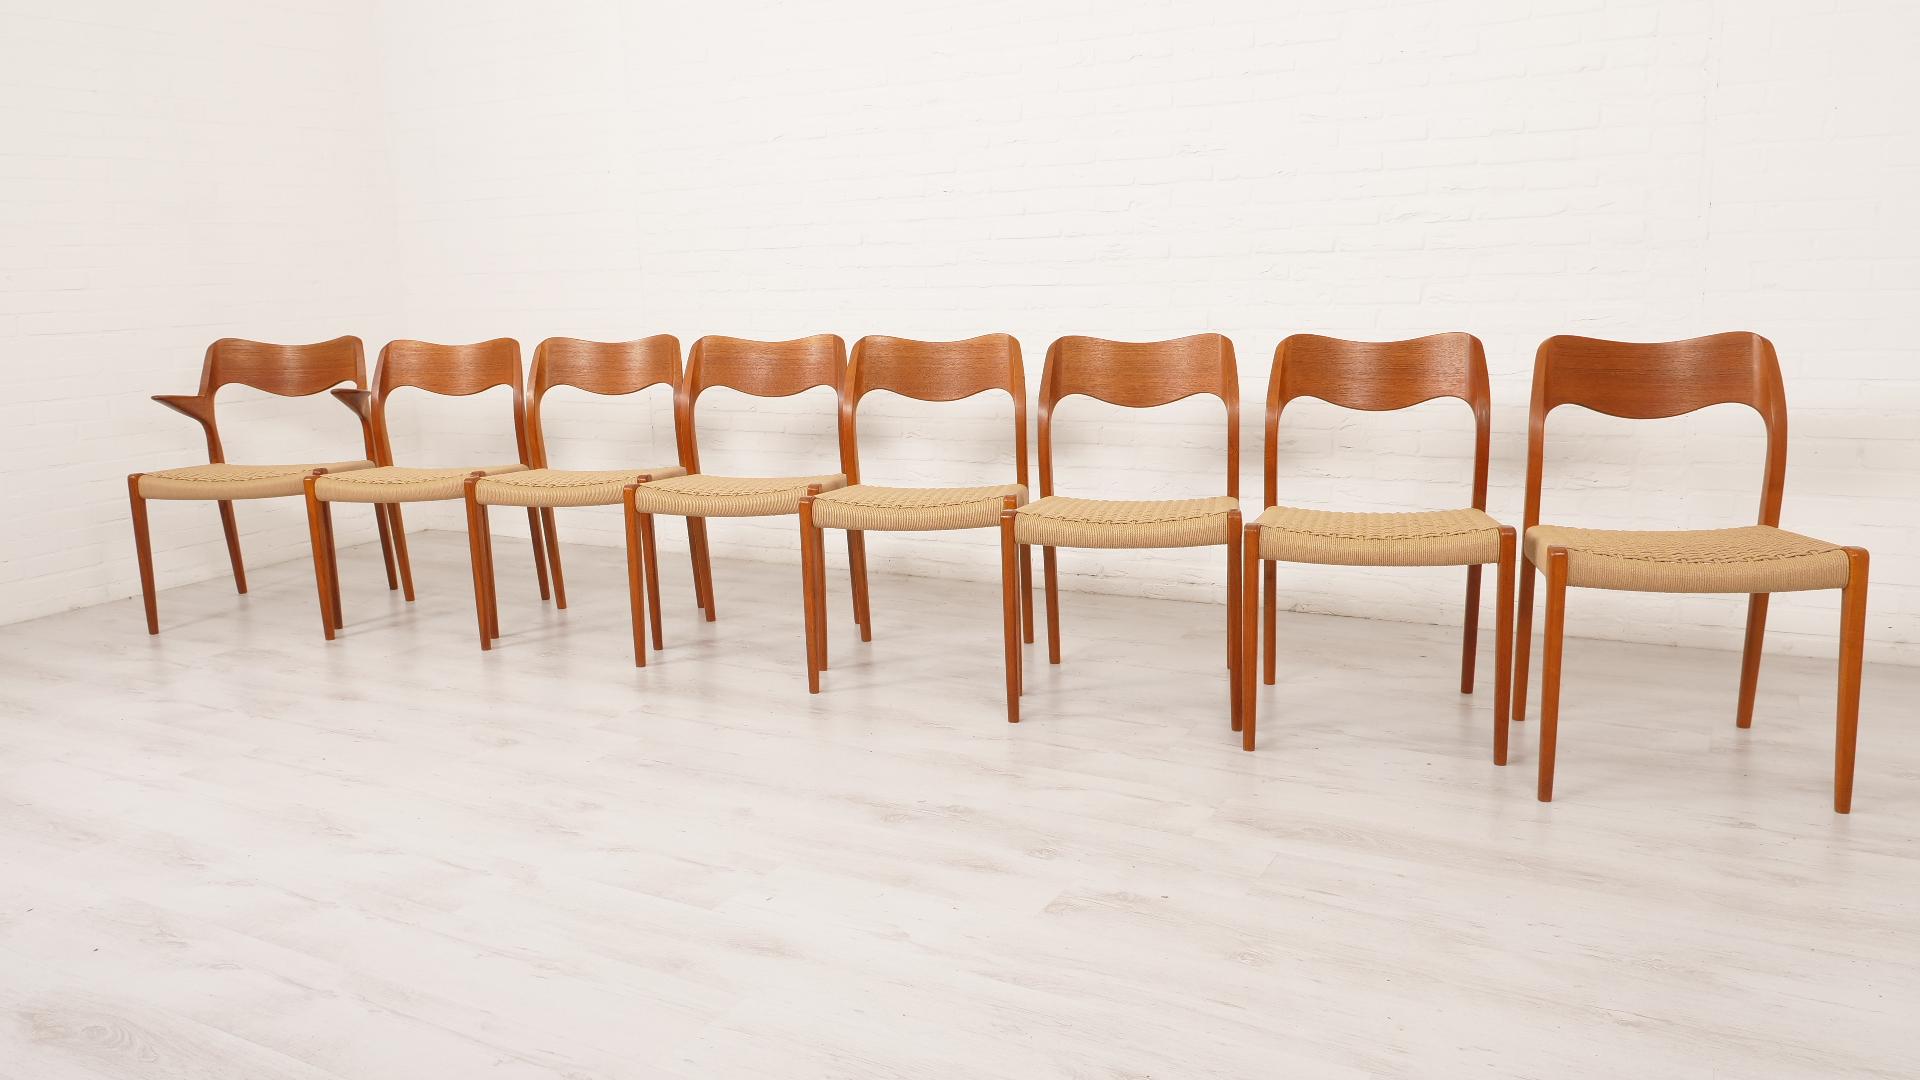 Set of 8 beautiful Danish vintage dining chairs. These chairs were designed by Niels Otto Møller. The set consists of 7 chairs in model 71 and 1 chair in model 55 (with armrests). The chairs are truly beautiful, the curves creating a timeless yet